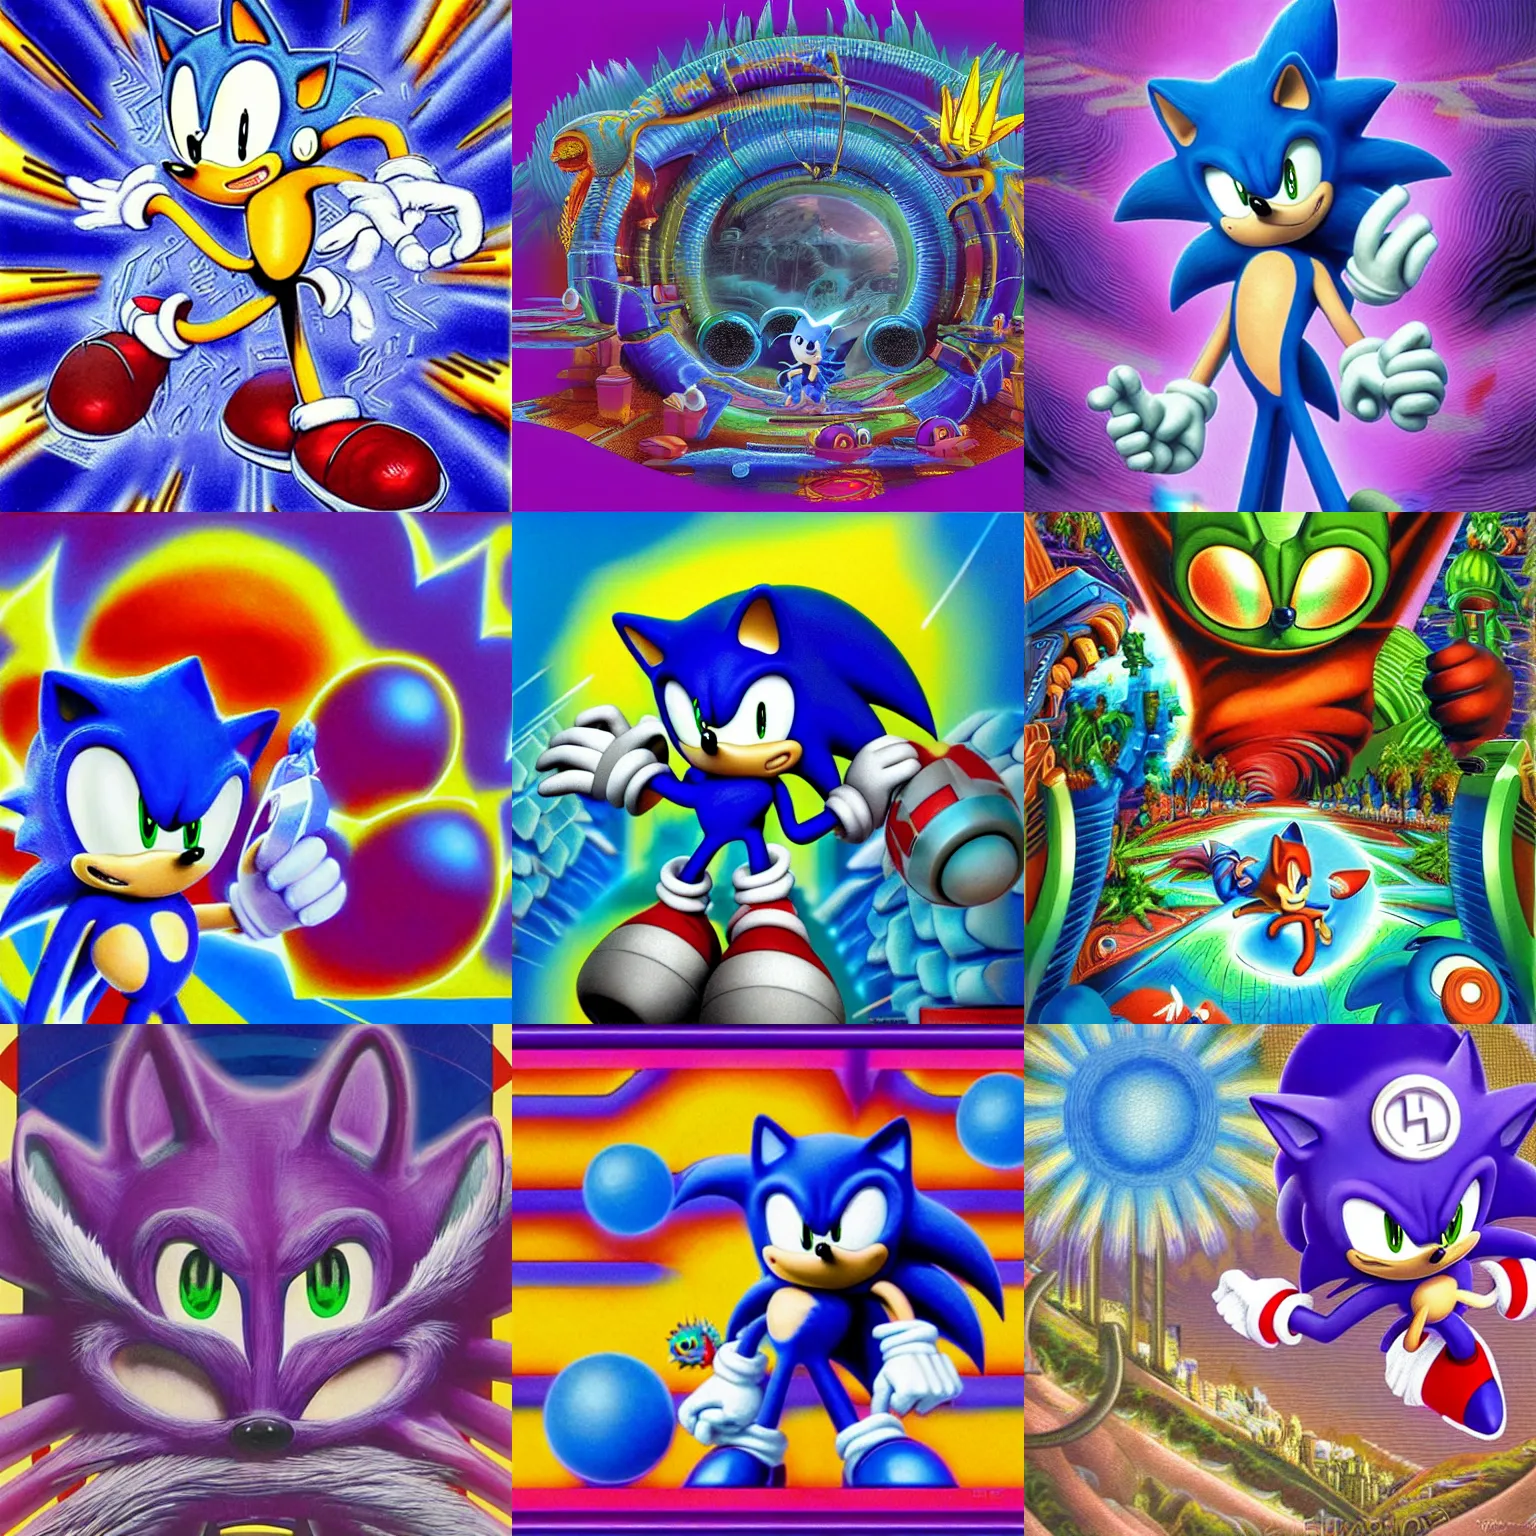 Prompt: sonic the hedgehog portrait dreaming of chrome claymation scifi matte painting landscape of a surreal alex grey, sonic retro moulded professional soft pastels high quality airbrush art album cover of a liquid dissolving airbrush sonic the hedgehog art lsd sonic the hedgehog swimming through cyberspace purple checkerboard background 1 9 8 0 s 1 9 8 2 sega genesis video game